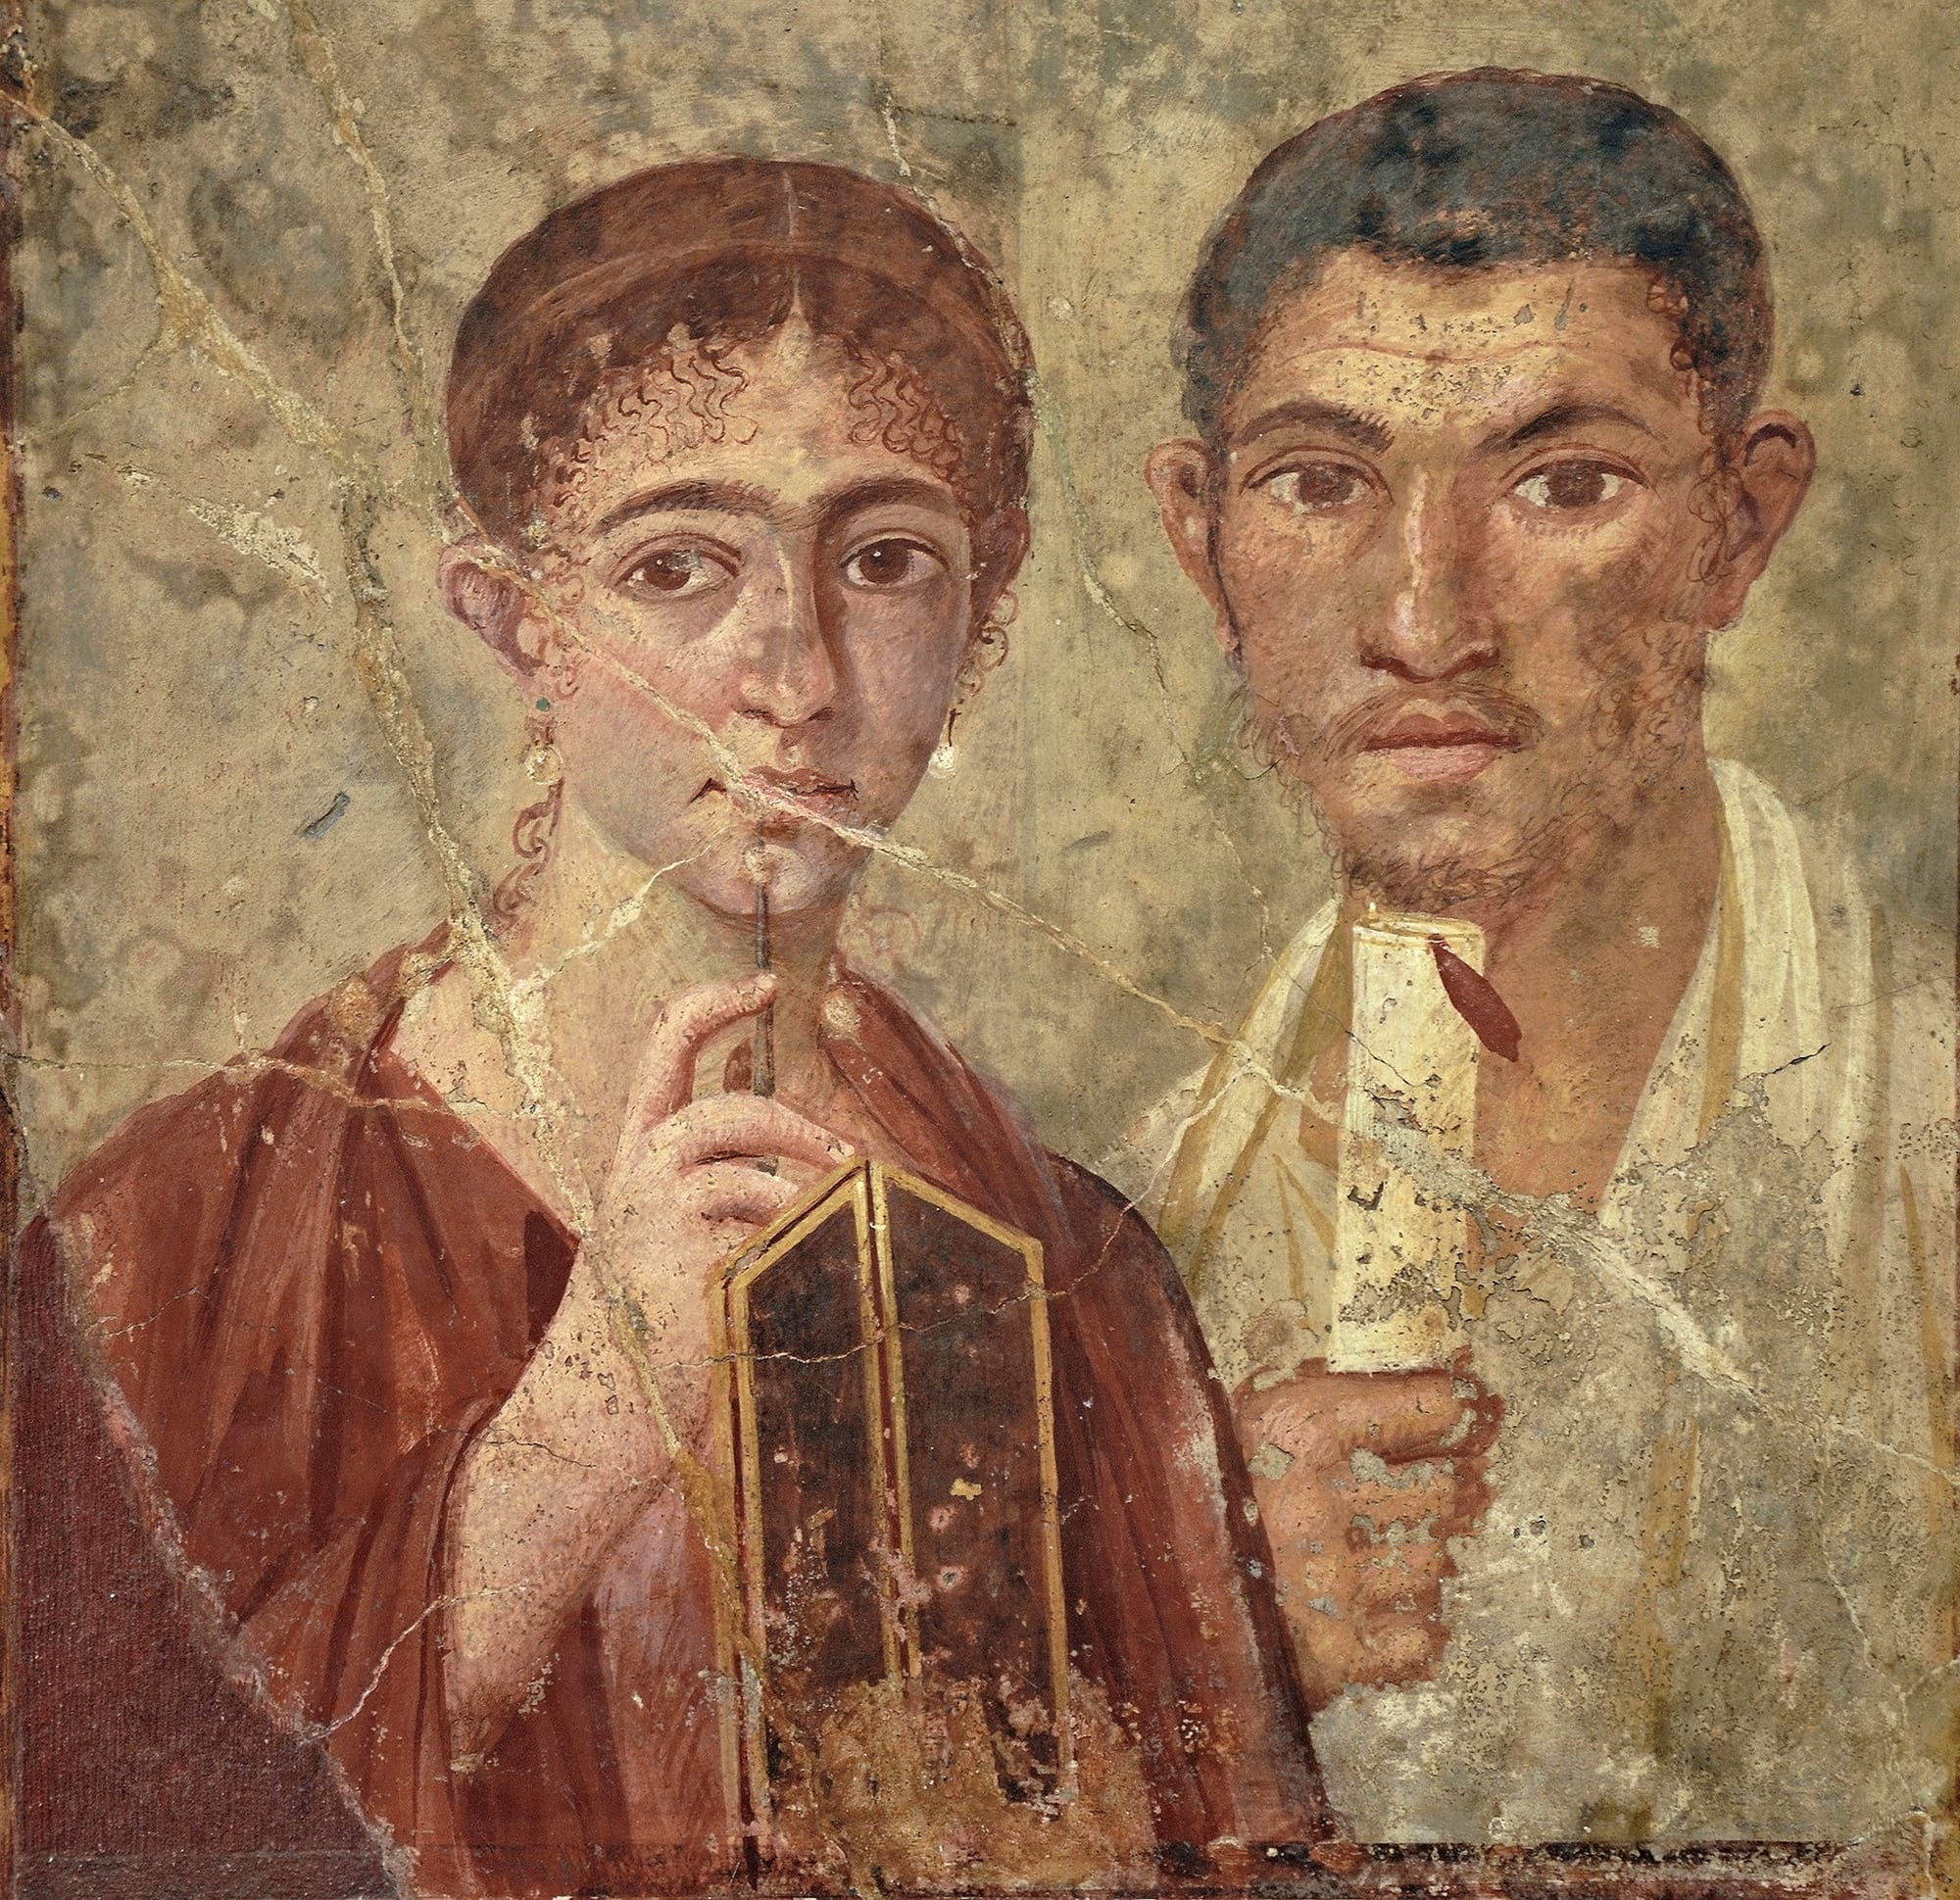 Fresco depicting the baker Terentius Neo and his wife, from Pompeii, House of Terentius, Naples National Archaeological Museum